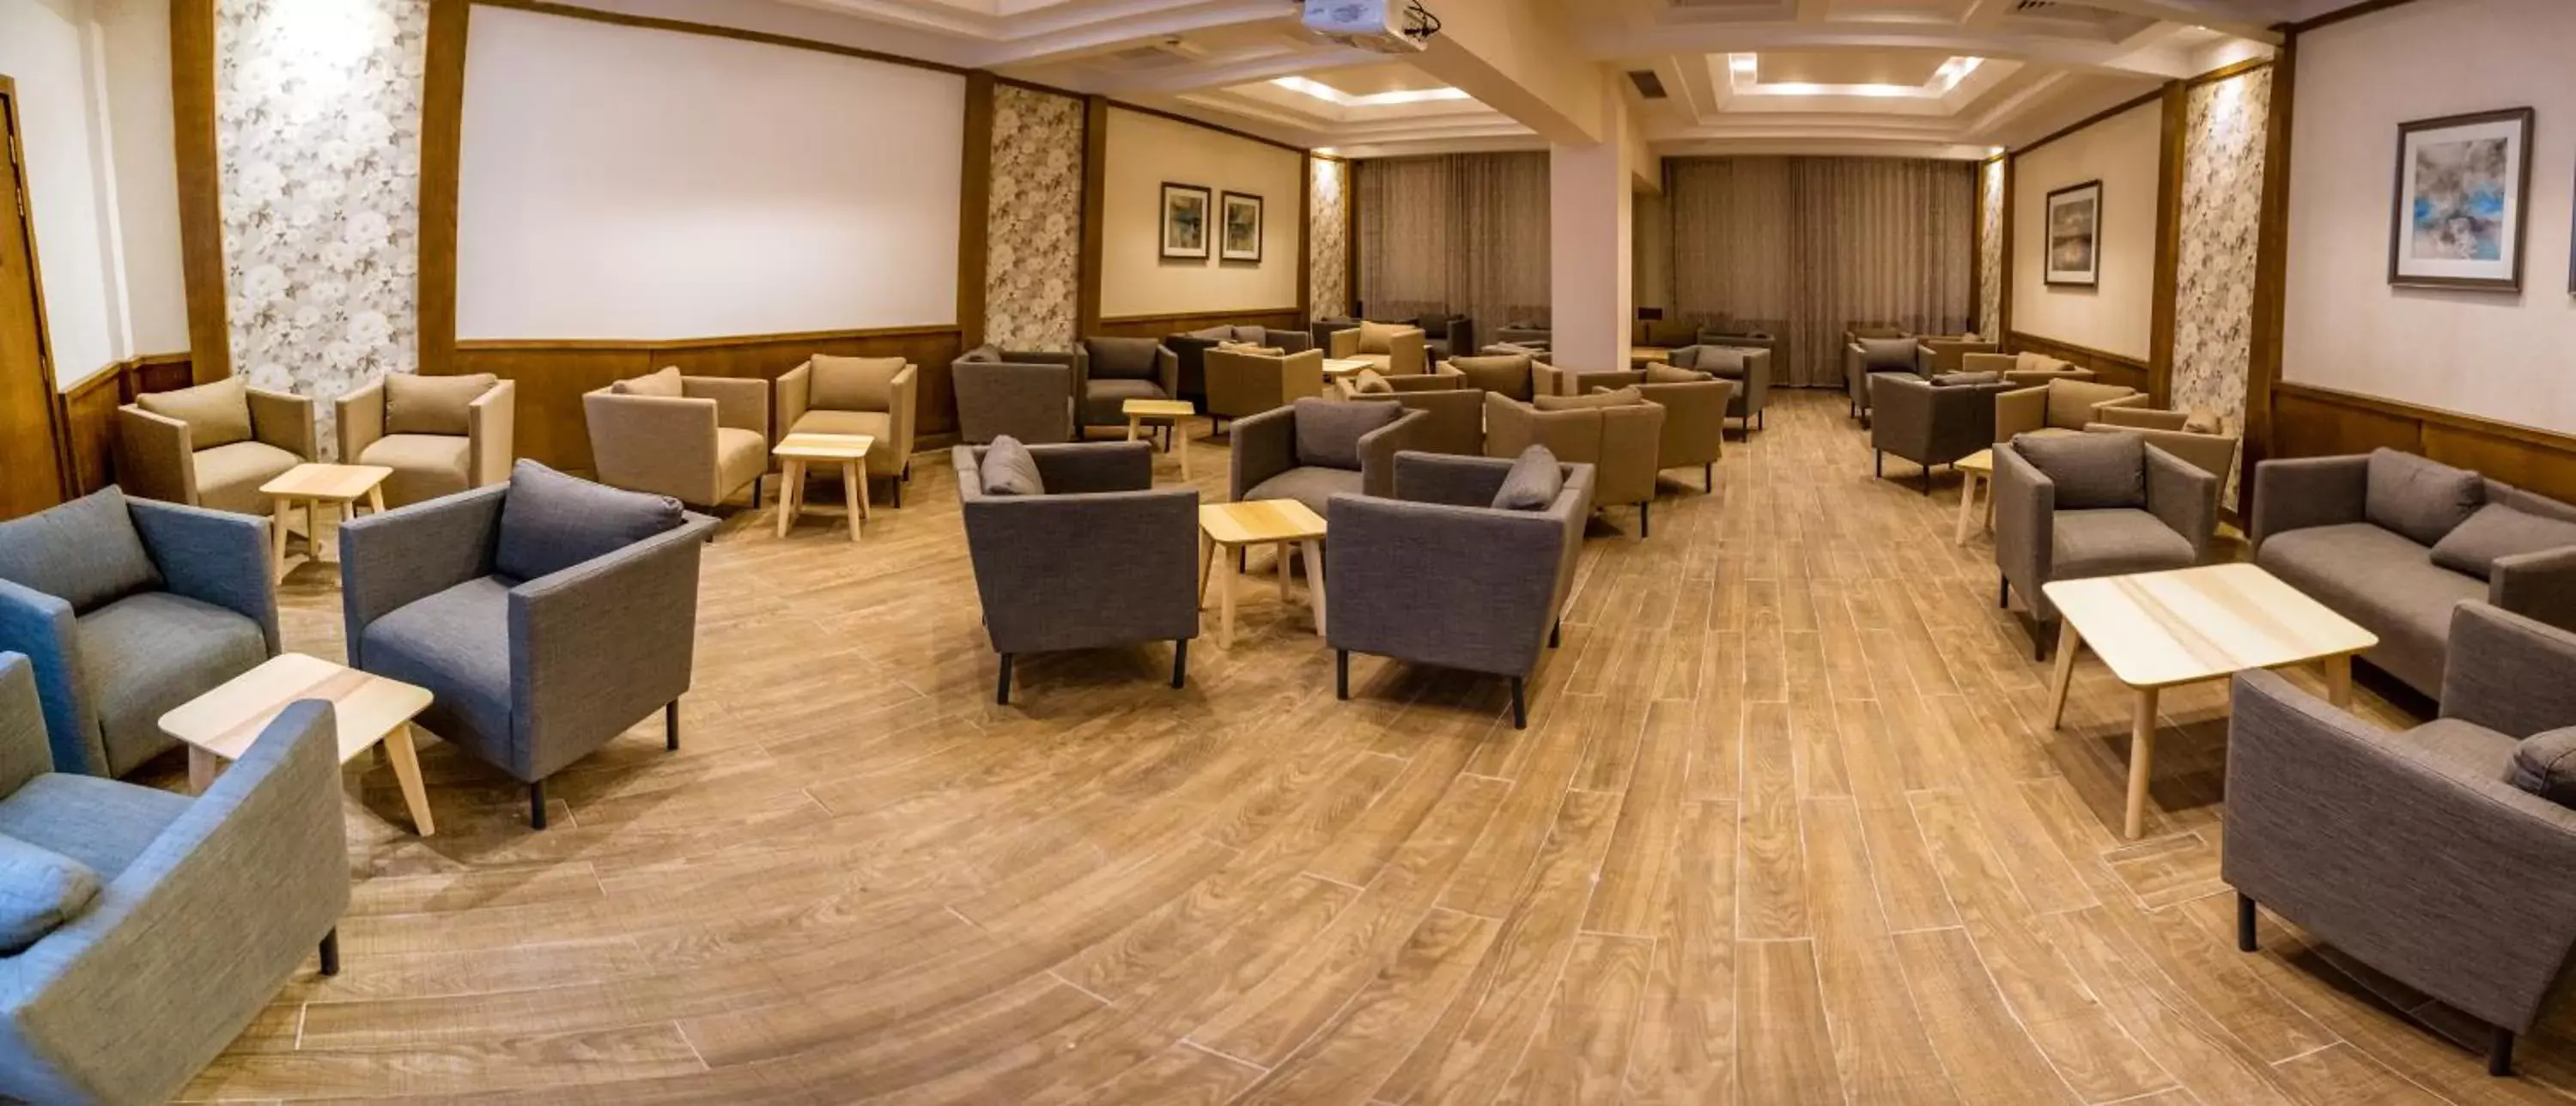 Banquet/Function facilities in Sky View Suites Hotel